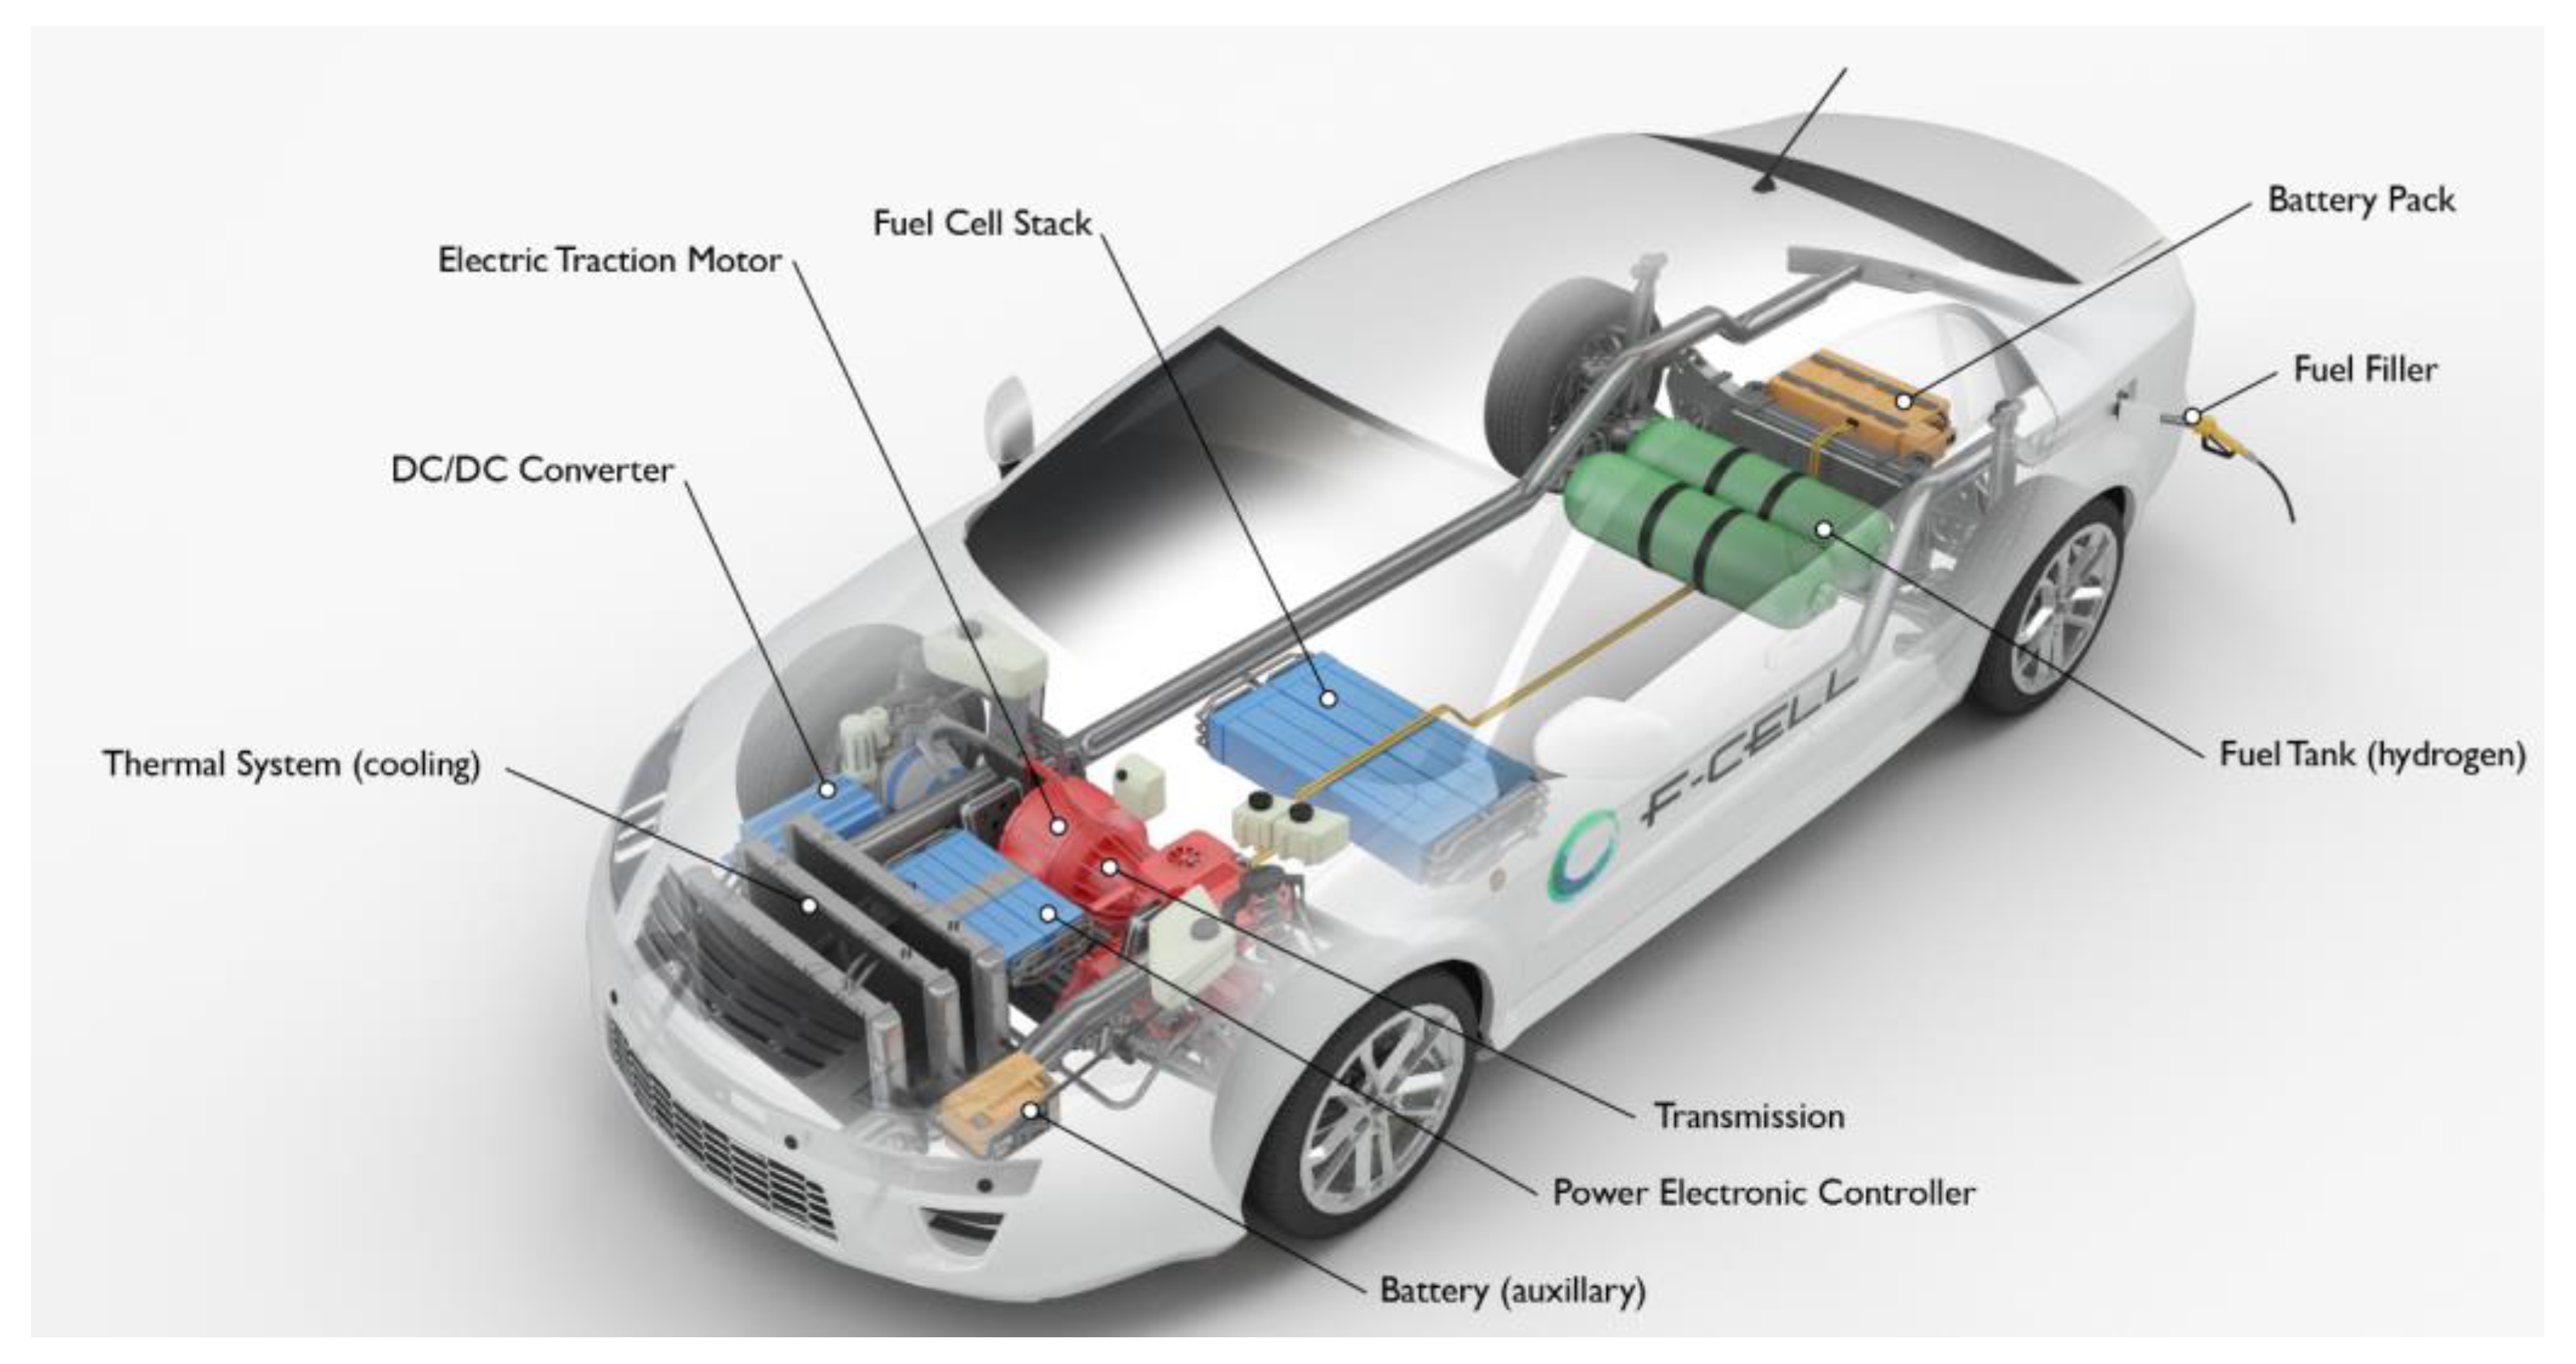 Are there any upcoming models of Fuel Cell Electric Vehicles?